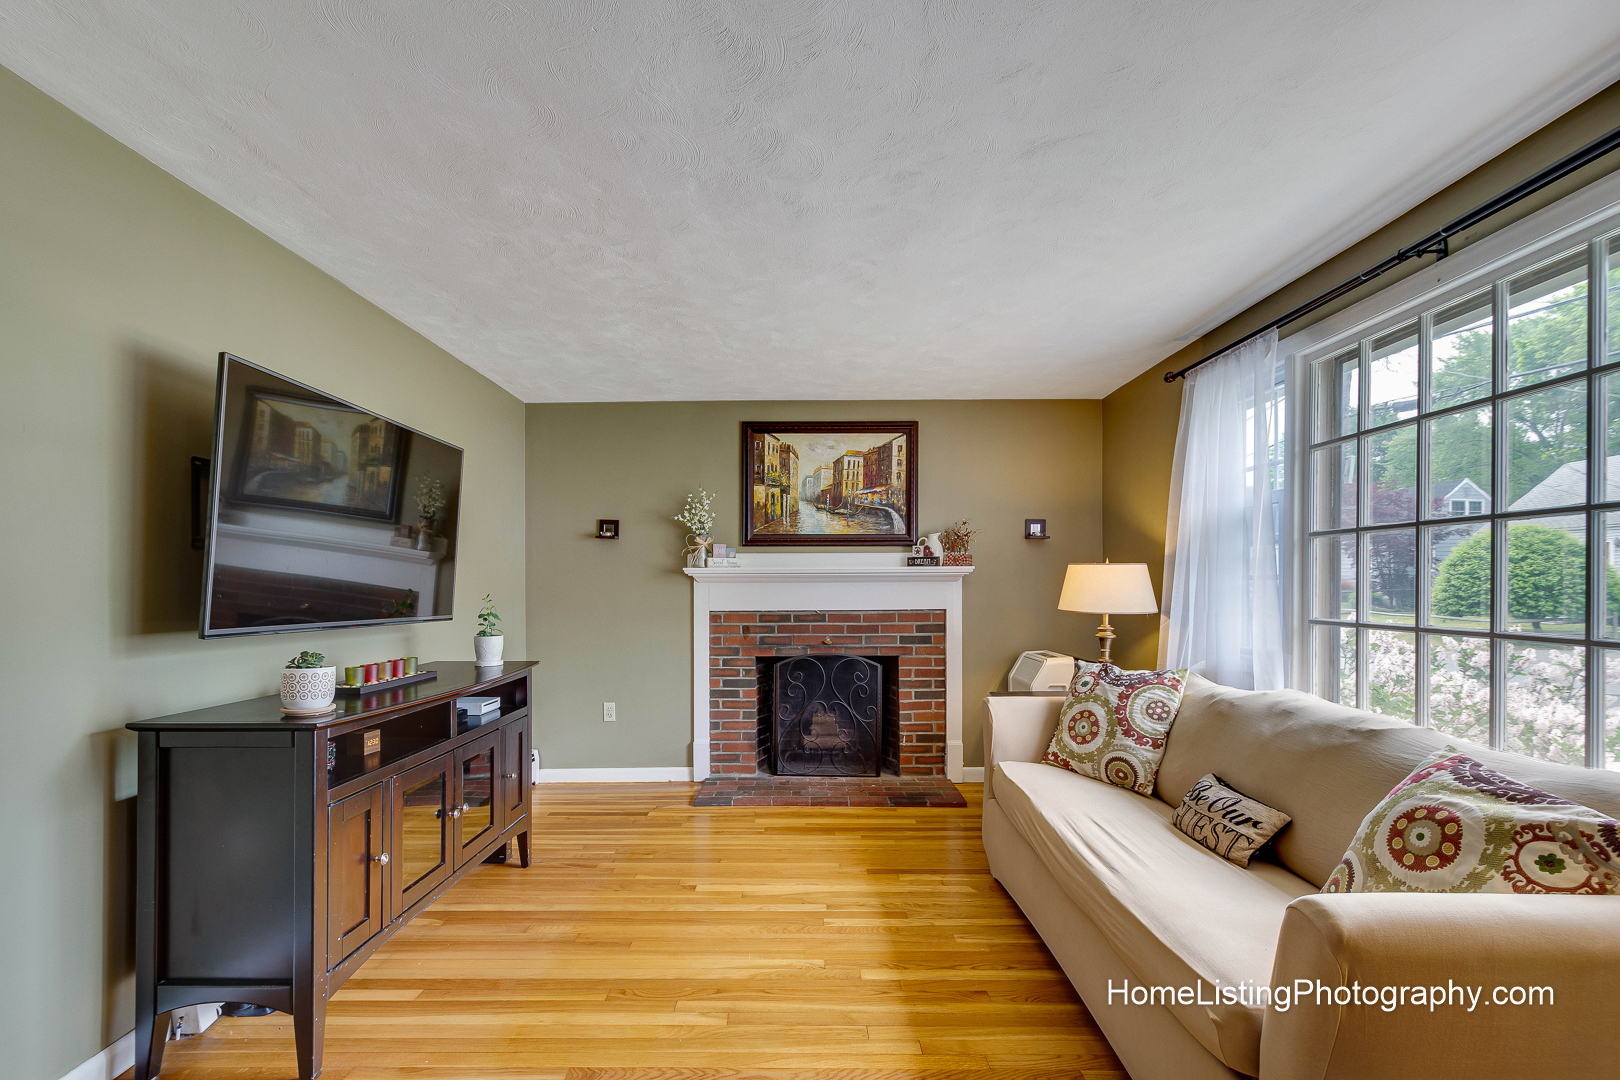 Thomas Adach - Lowell MA professional real estate photographer - 508-655-2225 Home Listing Photography